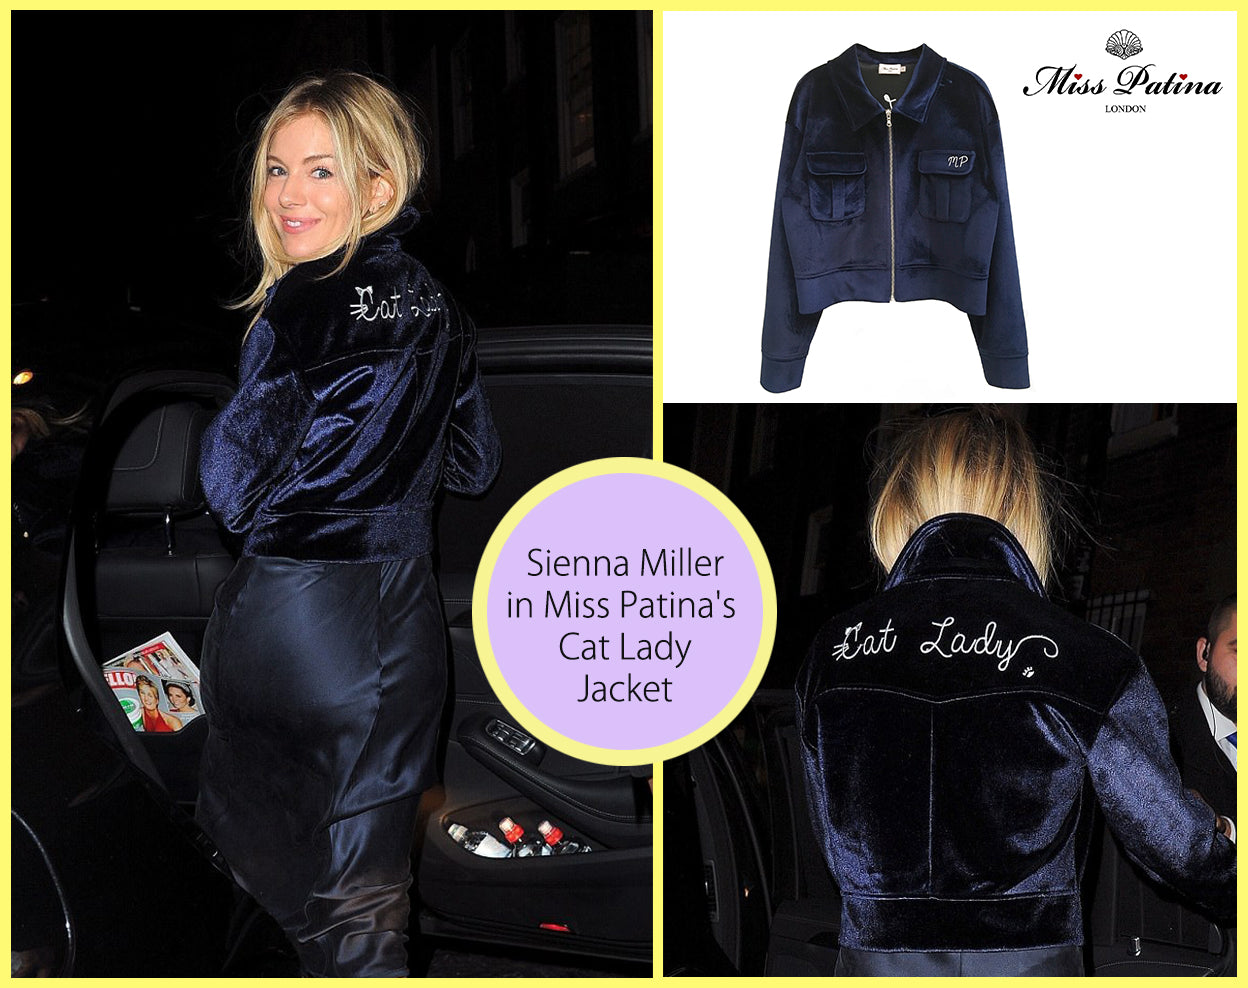 Spotted! Actress Sienna Miller in Cat Lady Jacket!